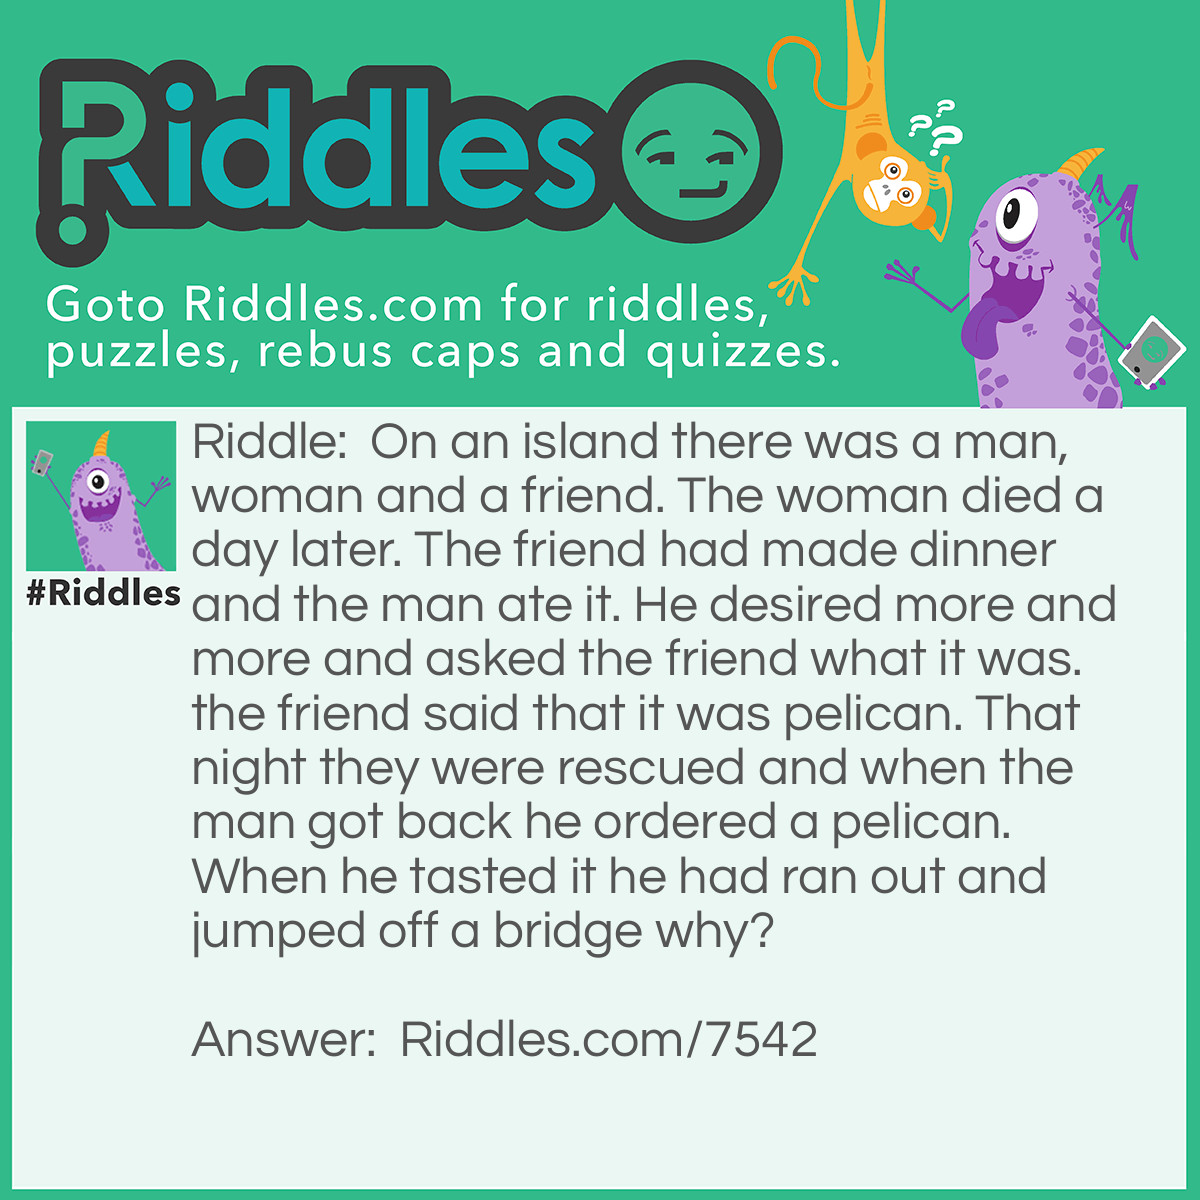 Riddle: On an island there was a man, woman and a friend. The woman died a day later. The friend had made dinner and the man ate it. He desired more and more and asked the friend what it was. the friend said that it was pelican. That night they were rescued and when the man got back he ordered a pelican. When he tasted it he had ran out and jumped off a bridge why? Answer: The pelican didn't taste the same so he realized he had ate his wife.